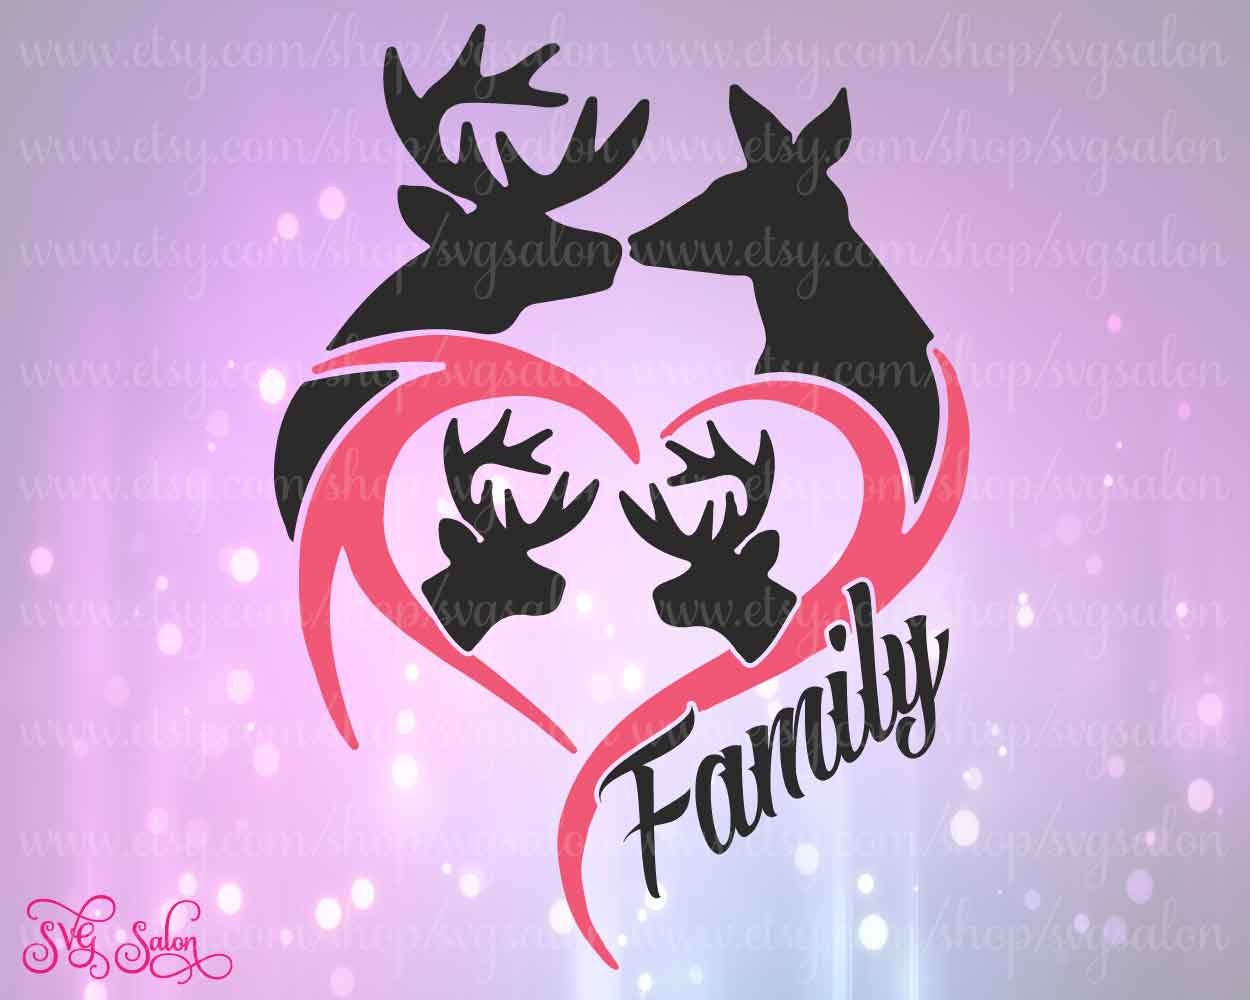 Download Deer Family with Doe Buck and Two Fawns Antler Heart by SVGSalon